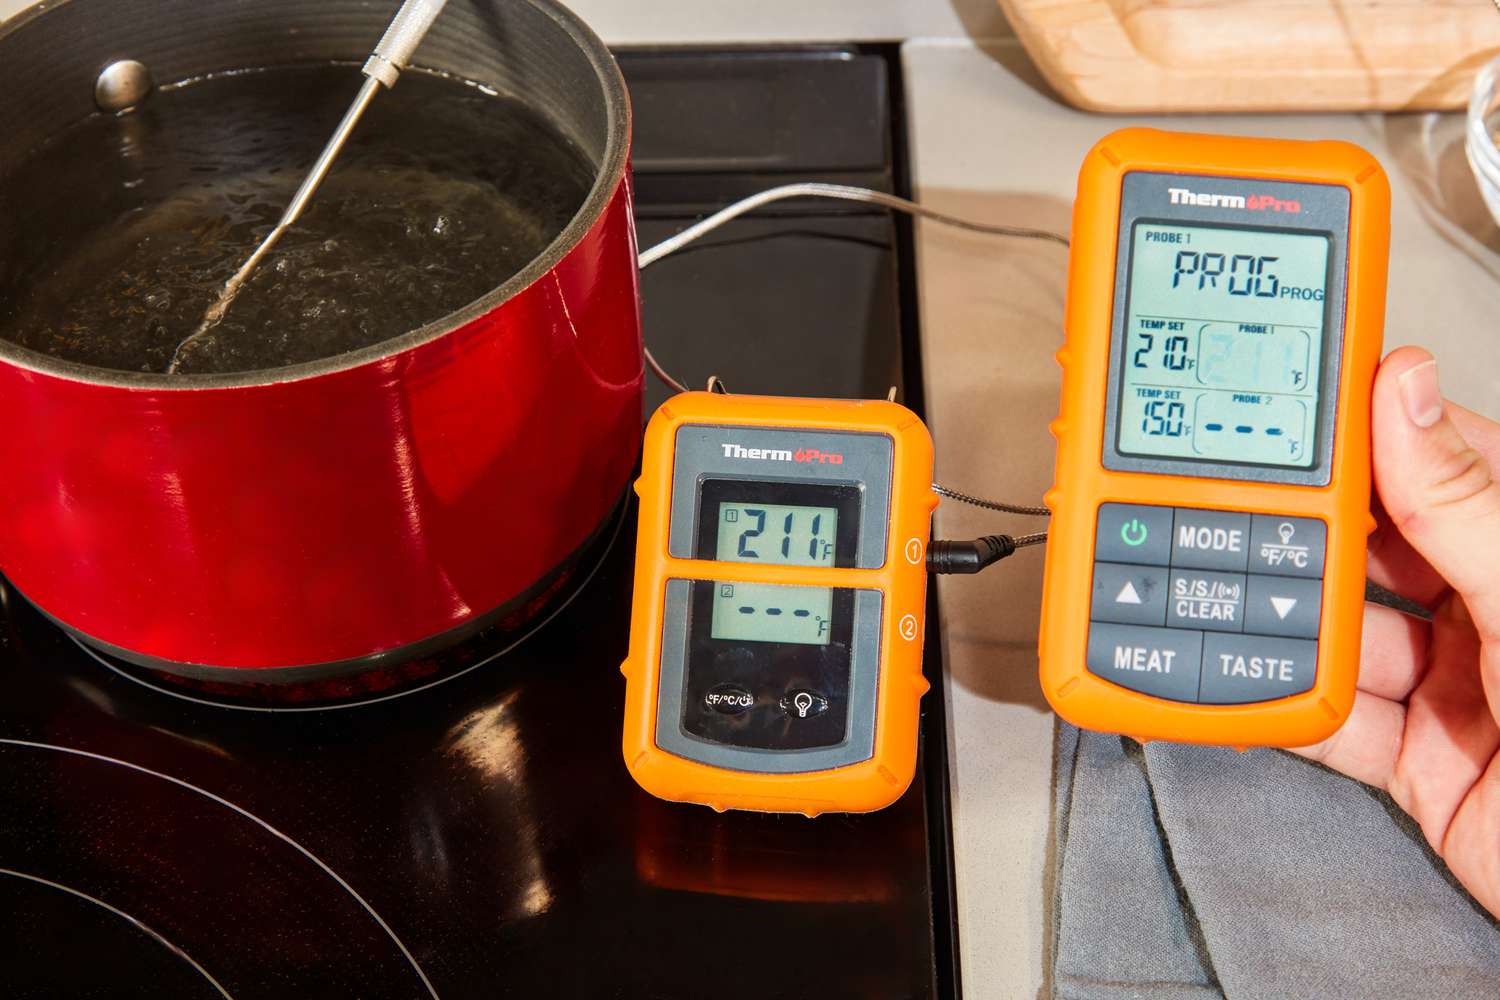 the polder thermometer being used to take the temperature of a pot of boiling water